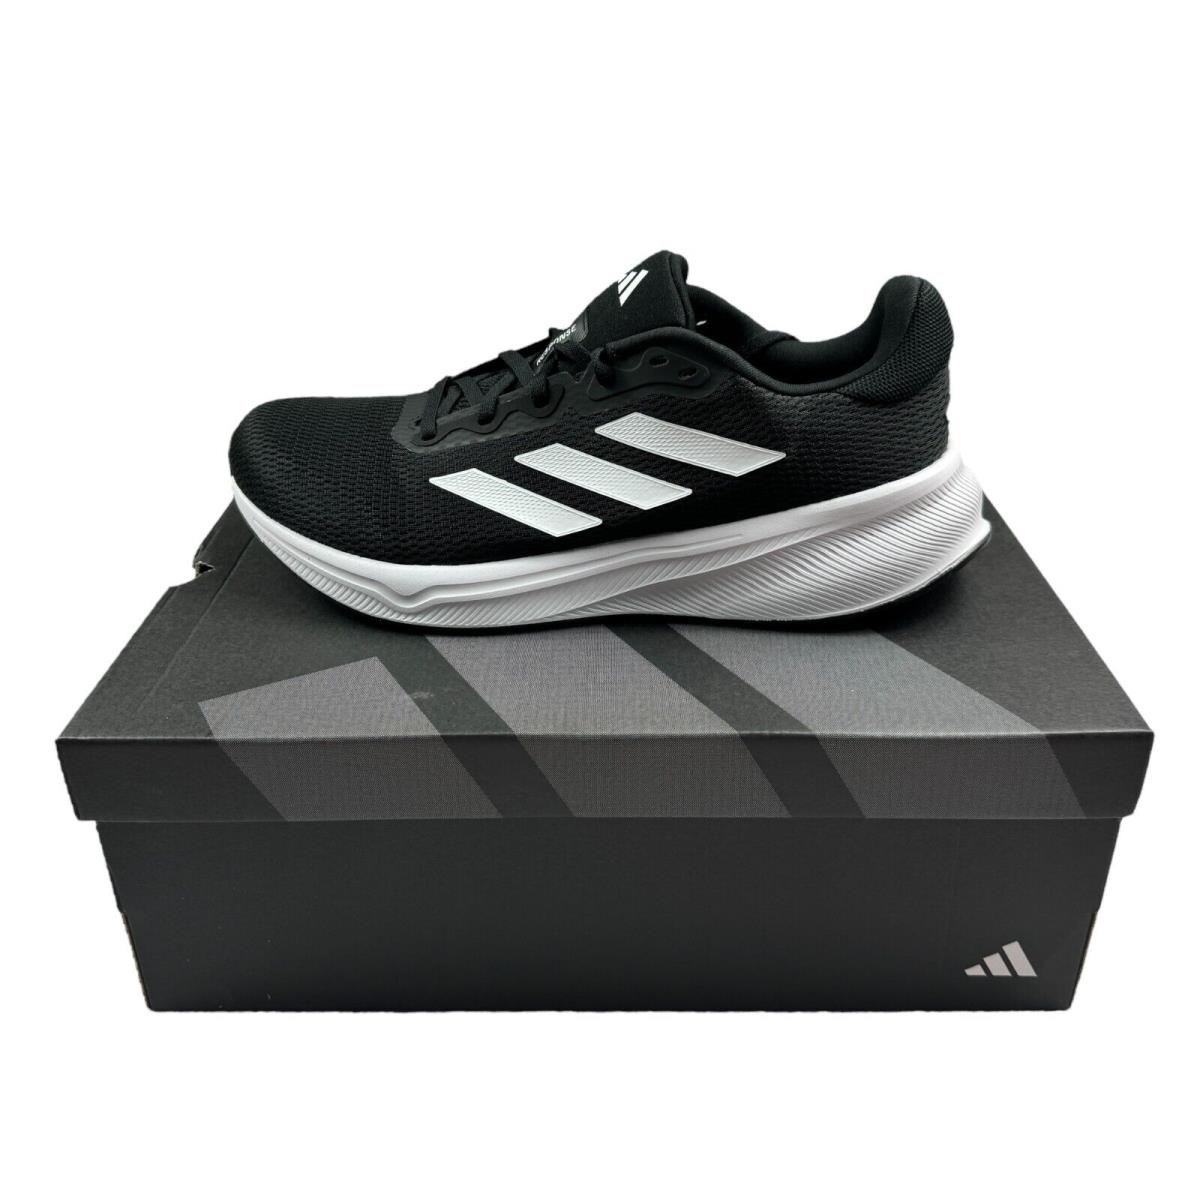 Adidas Mens Response All-surface Running Shoes Black/white 11